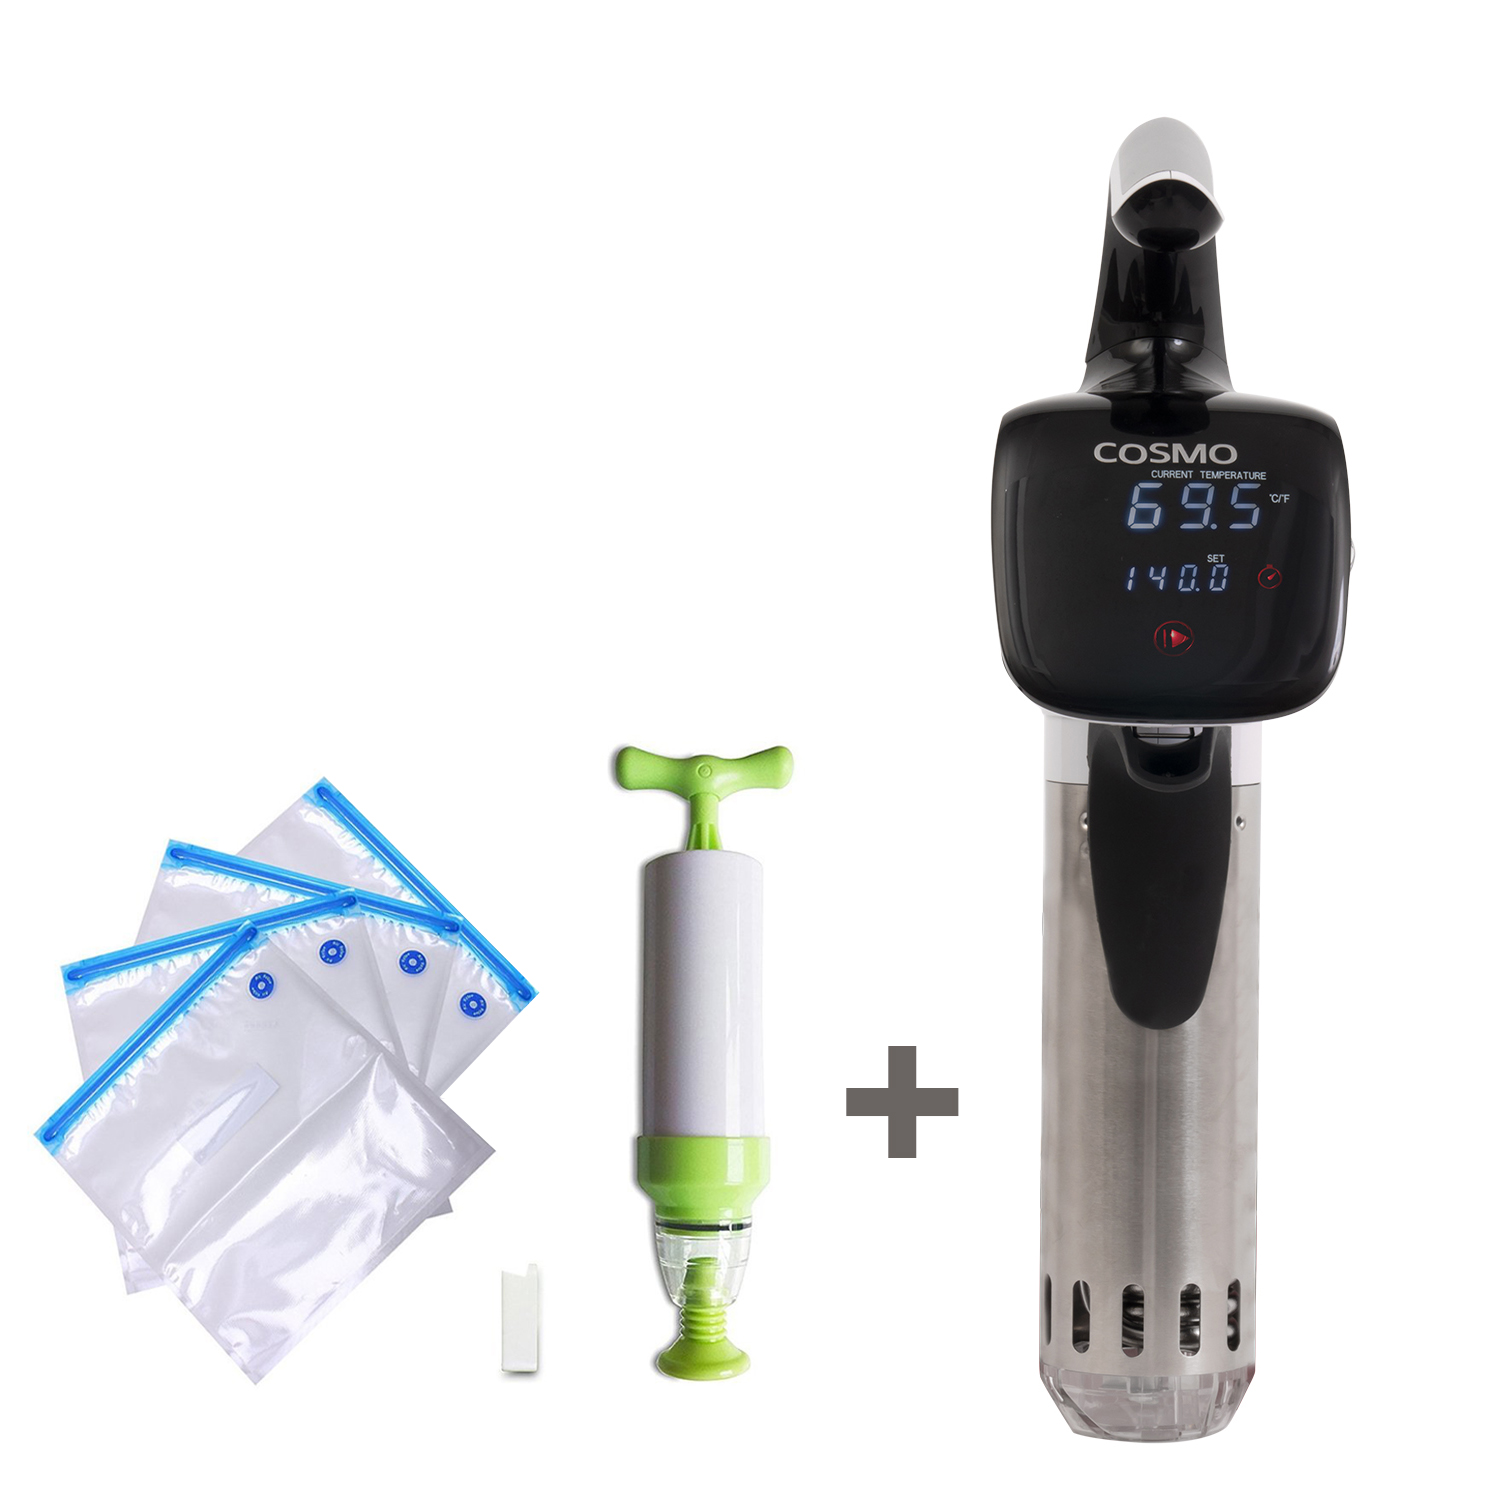 Cosmo Appliances Cosmo Sous Vide Precision Immersion Cooker Kit